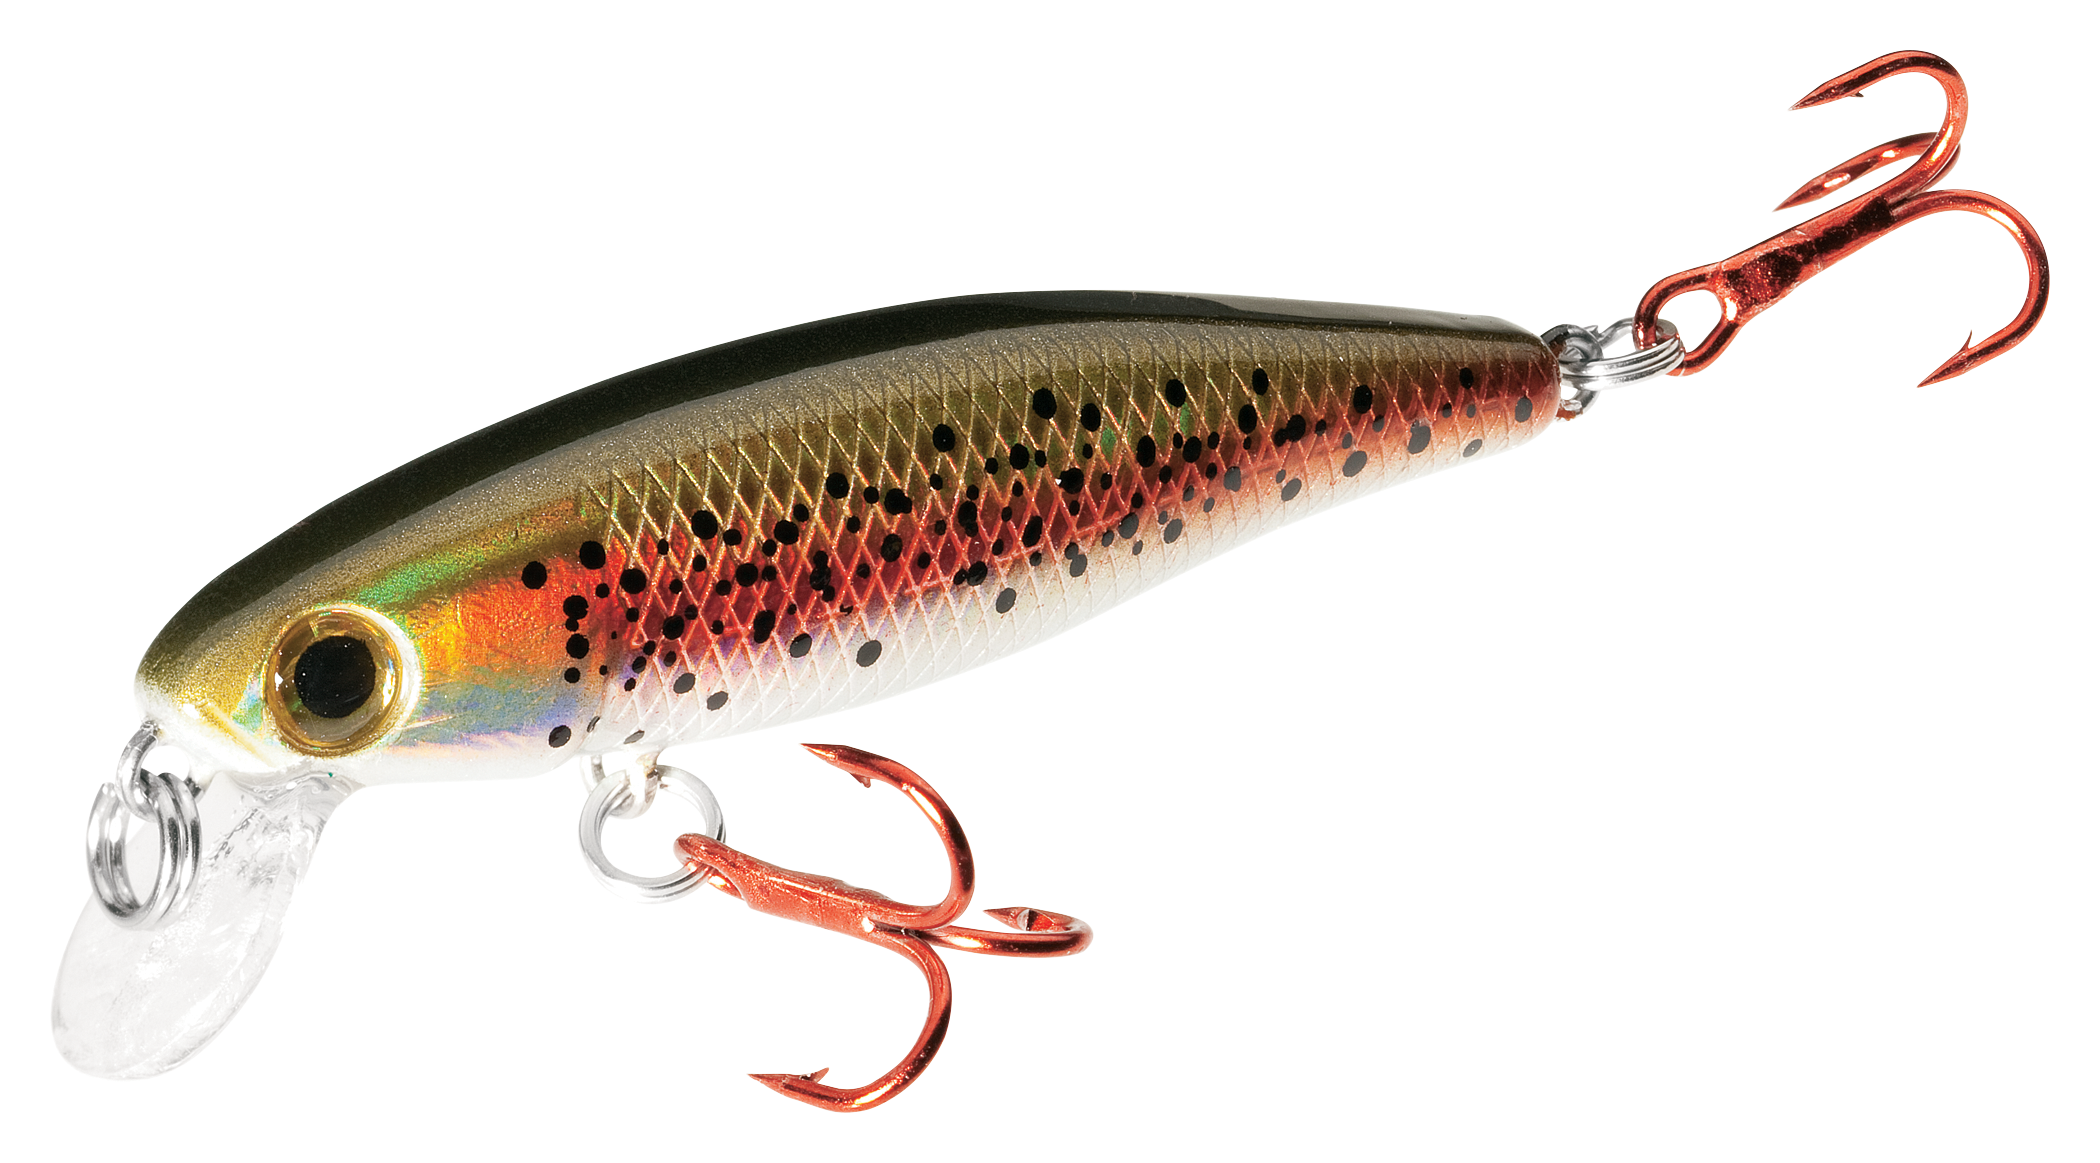 Dynamic Lures HD Trout (Glimmer Trout) – Trophy Trout Lures and